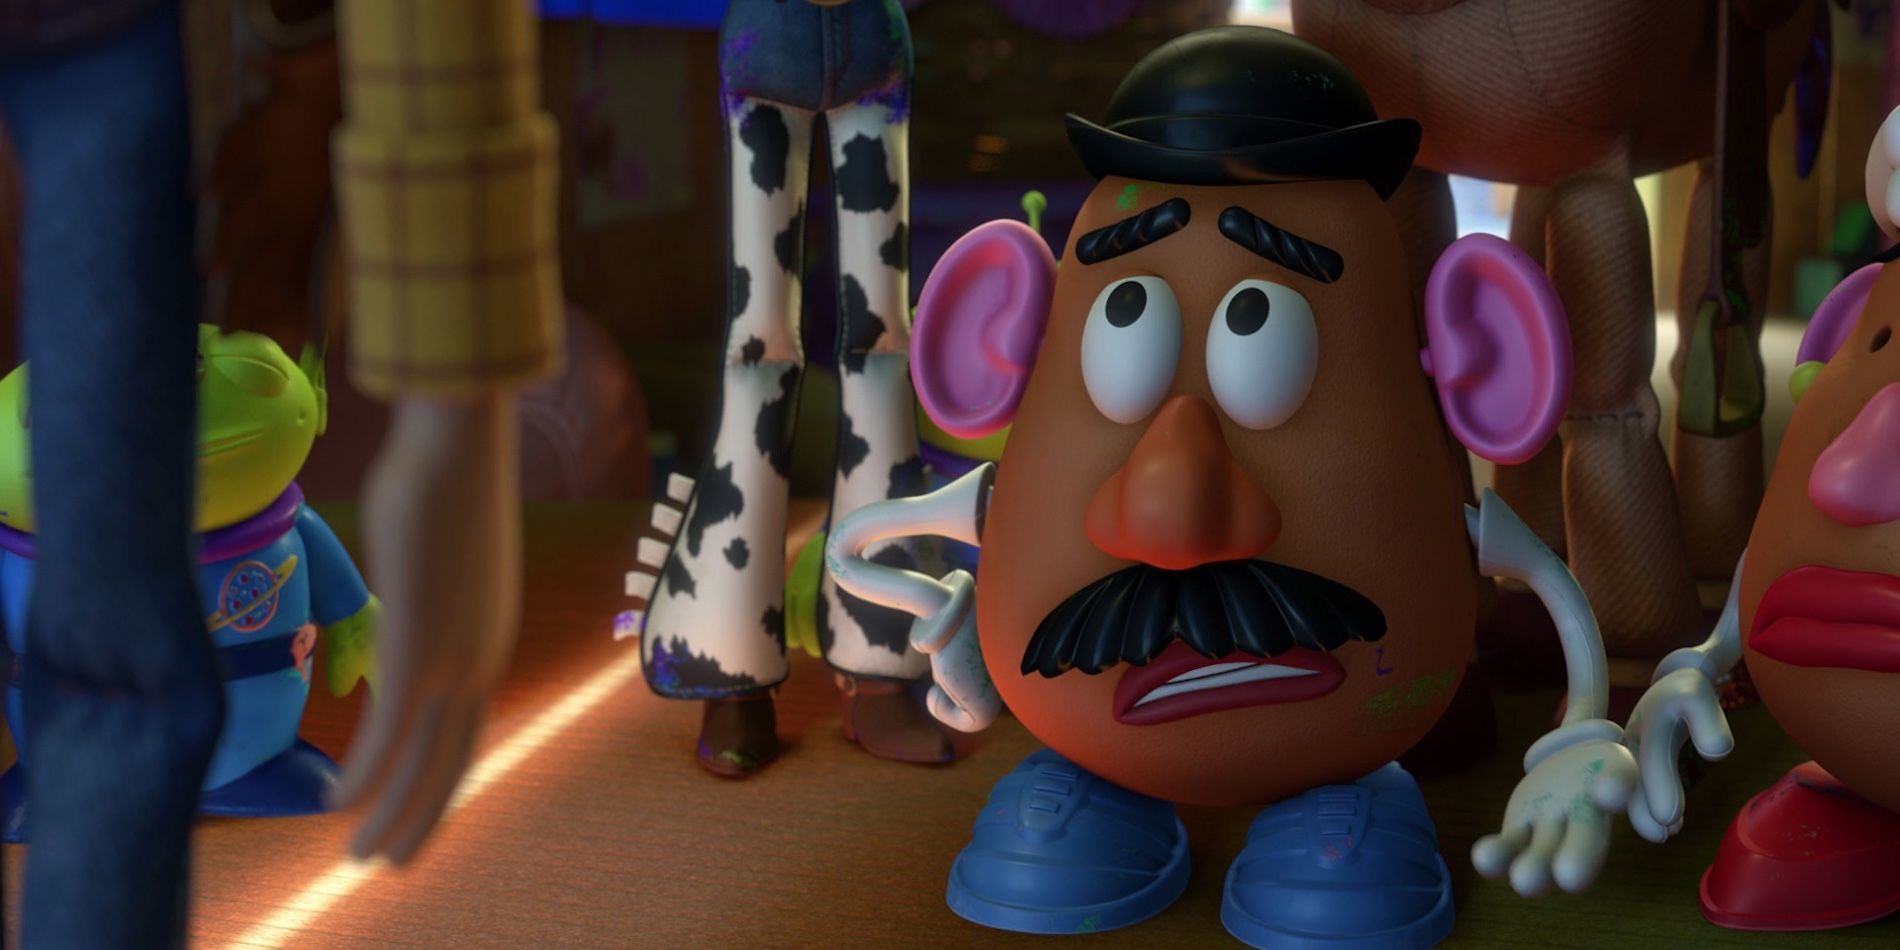 Mr. Potato Head in Toy Story looking worried and talking.